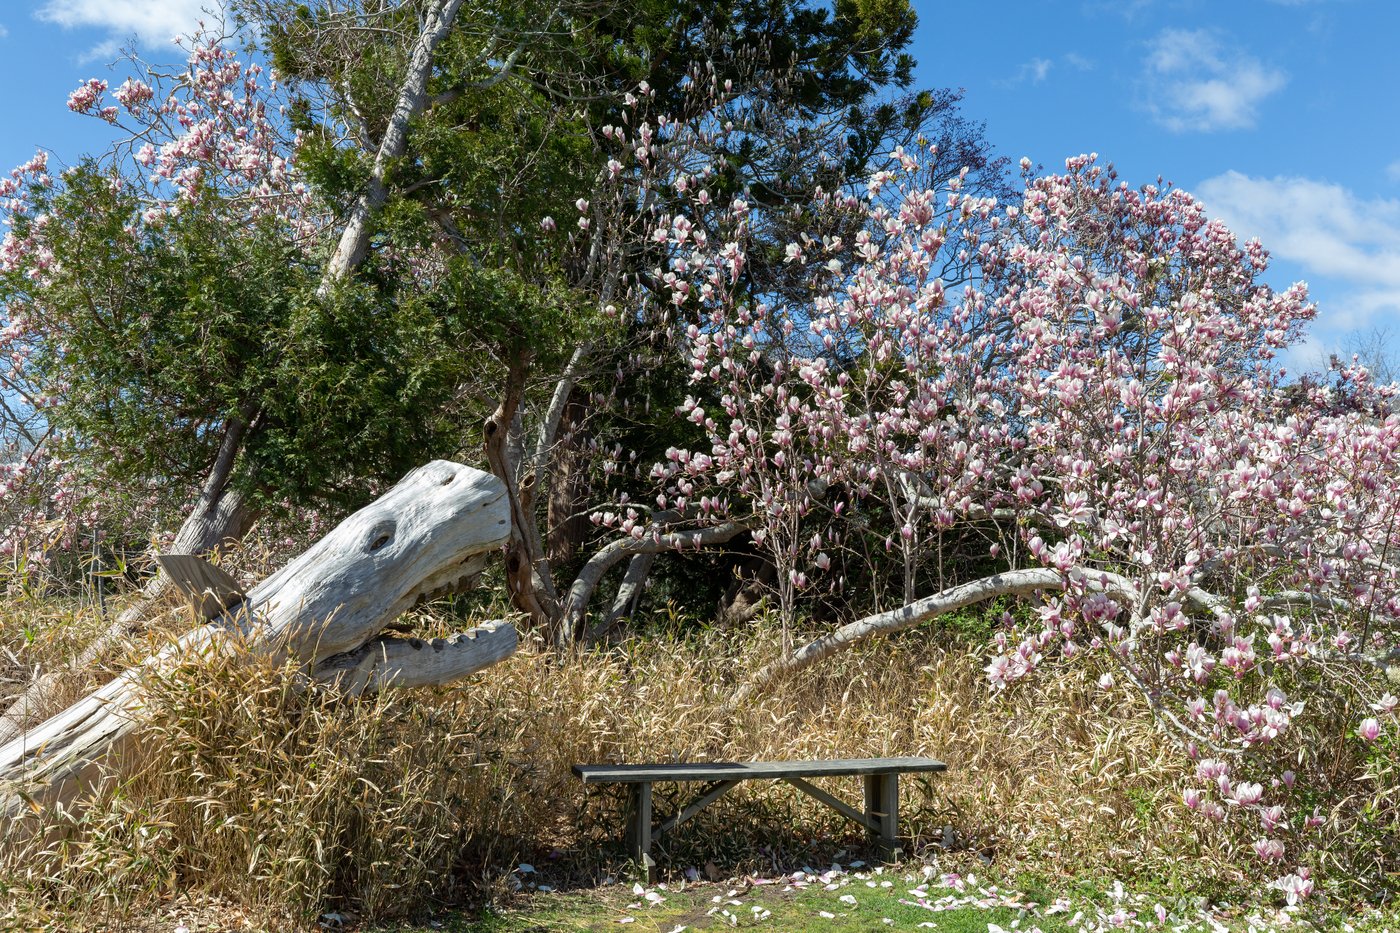 bench with a blooming tree and a stump that looks like a mouth